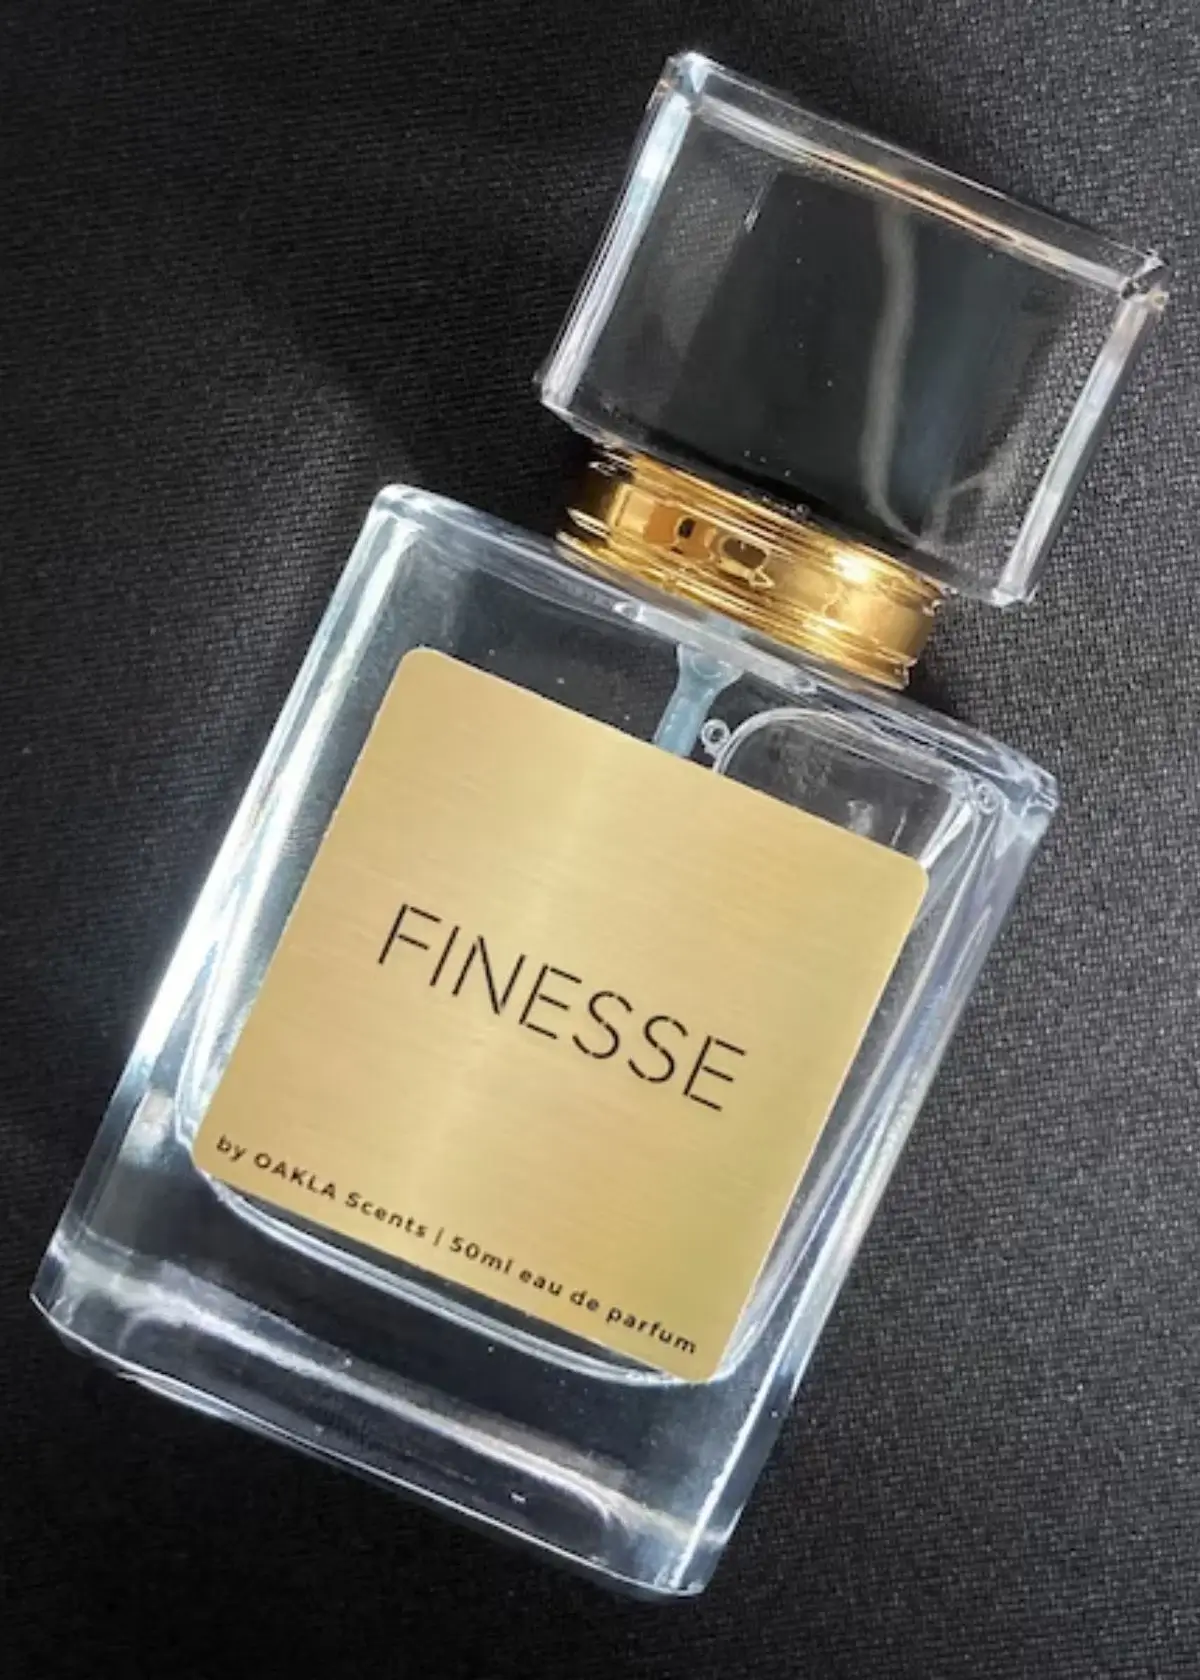 Can Eau de Parfum be worn on clothing as well as skin?